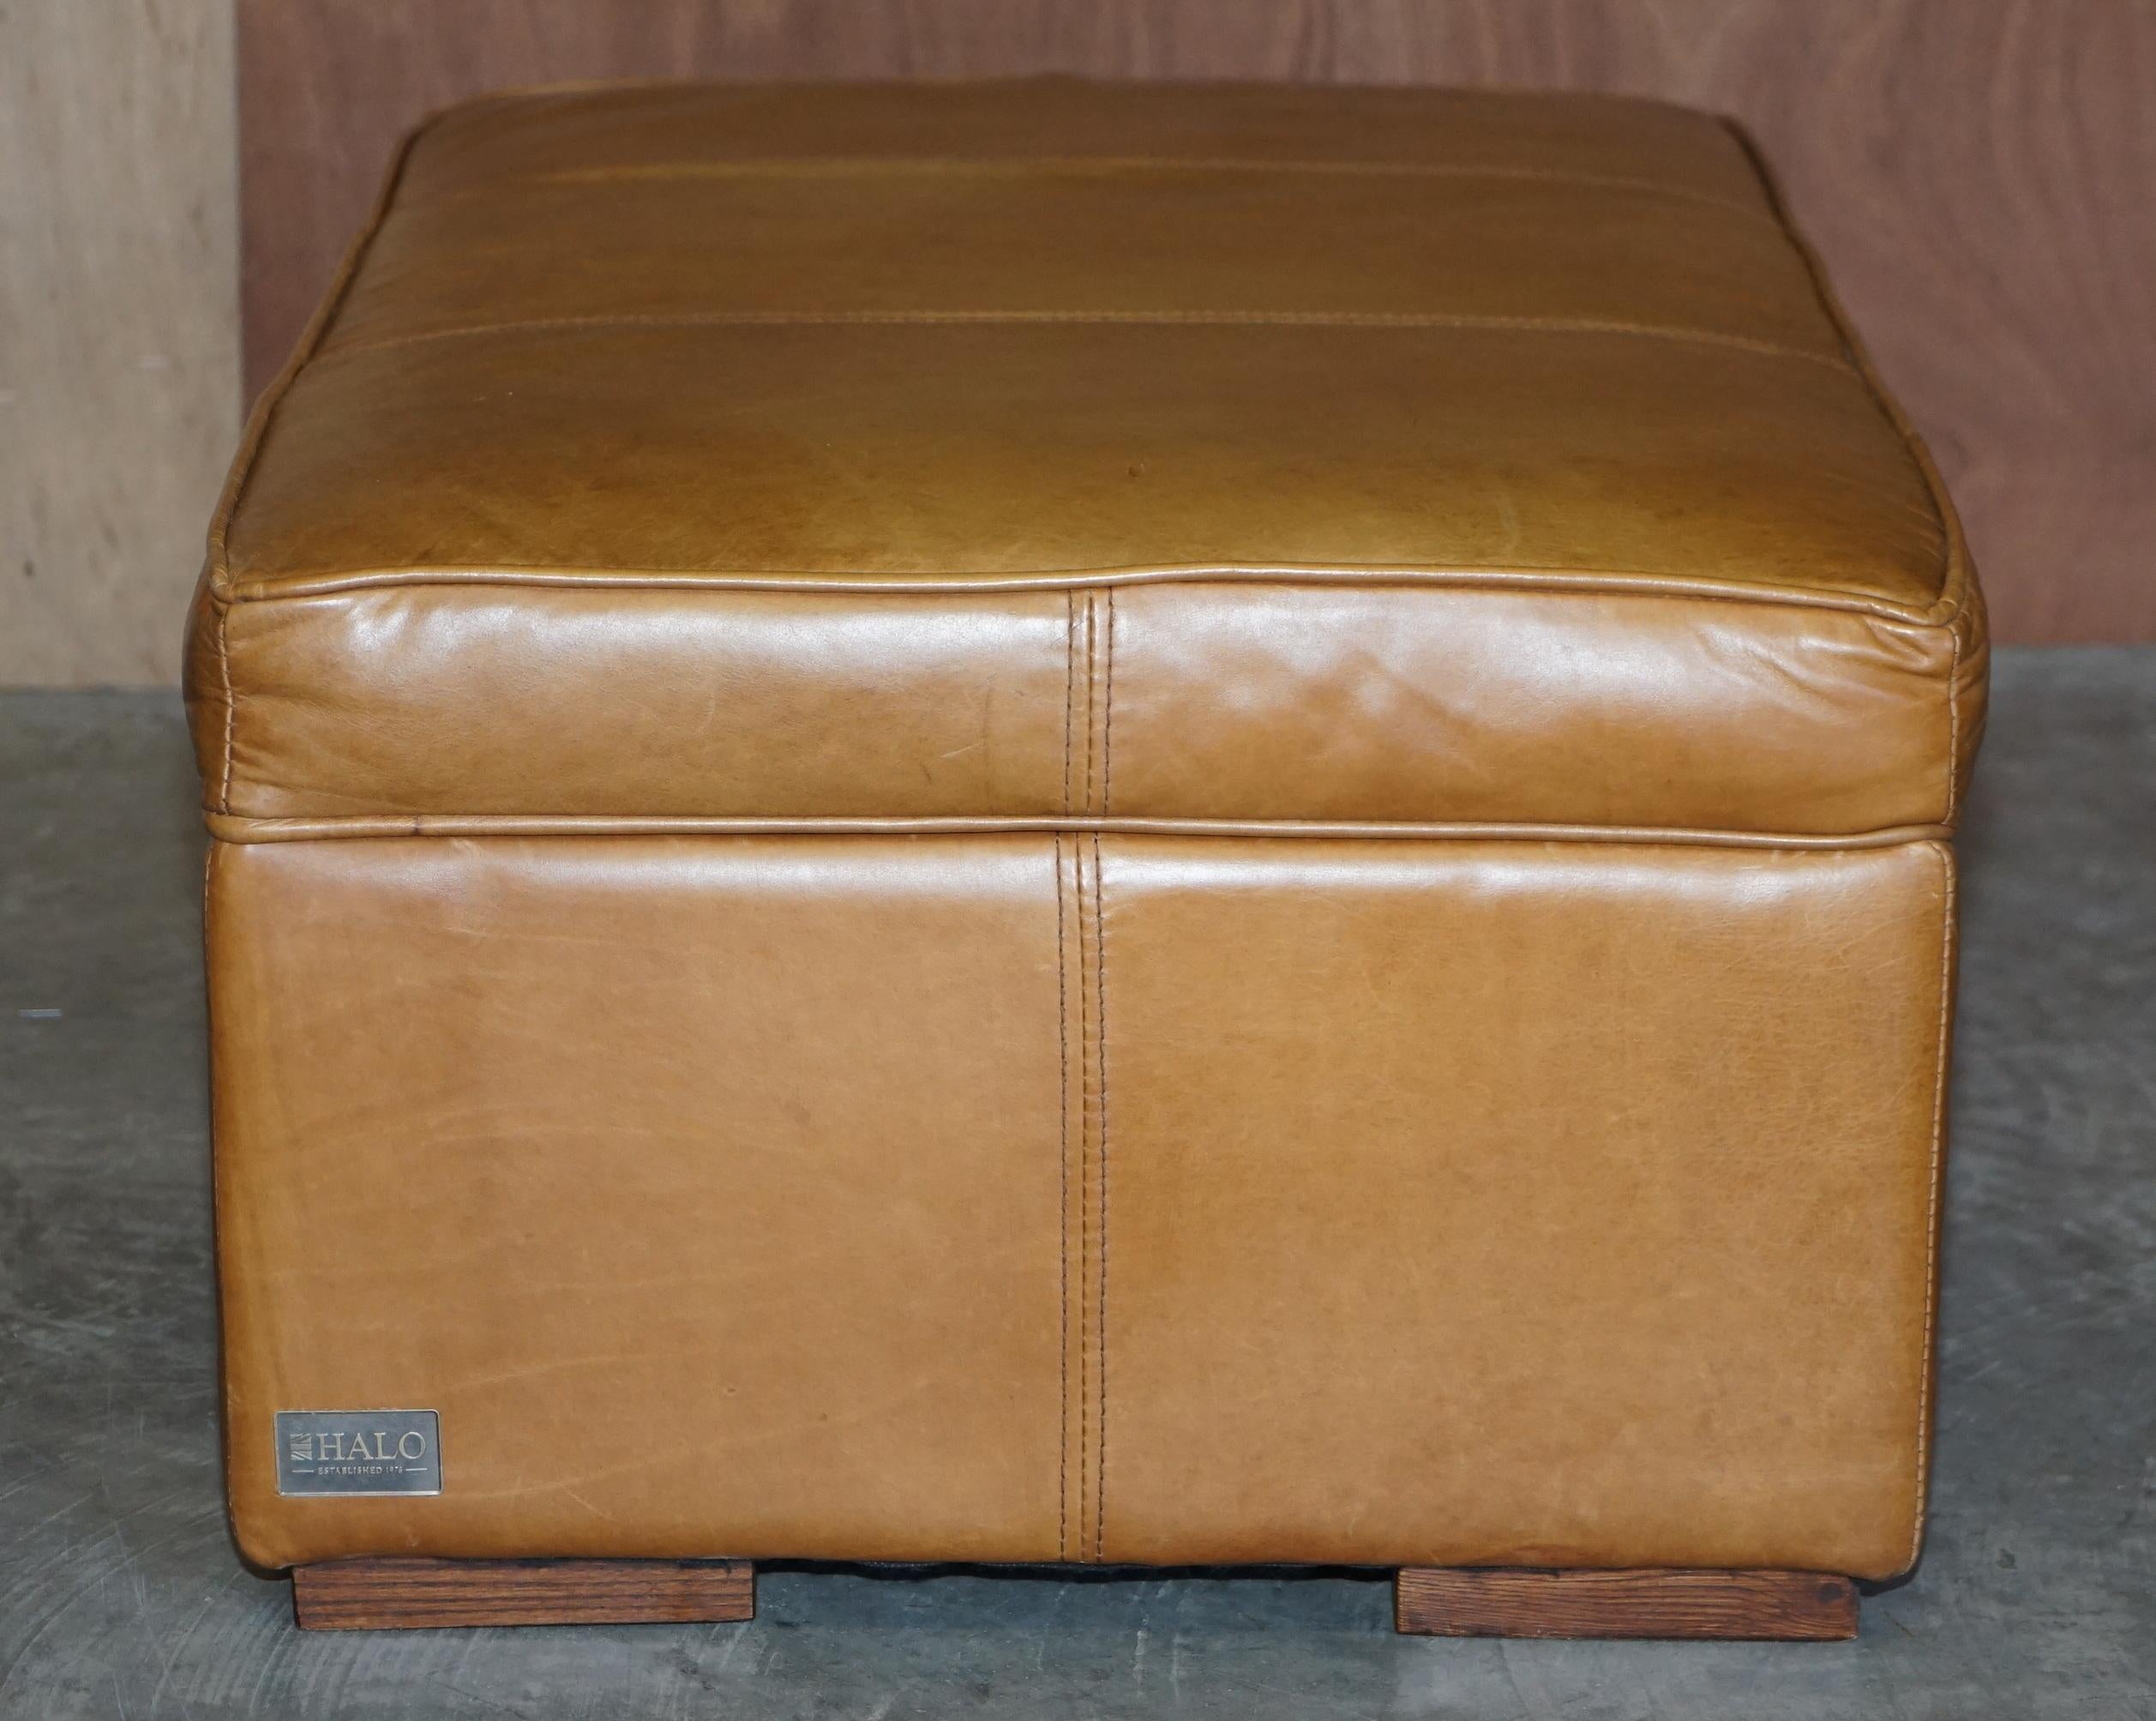 20th Century Halo Grouch Reggio Tan Brown Leather Large Ottoman Footstool for Four to Share